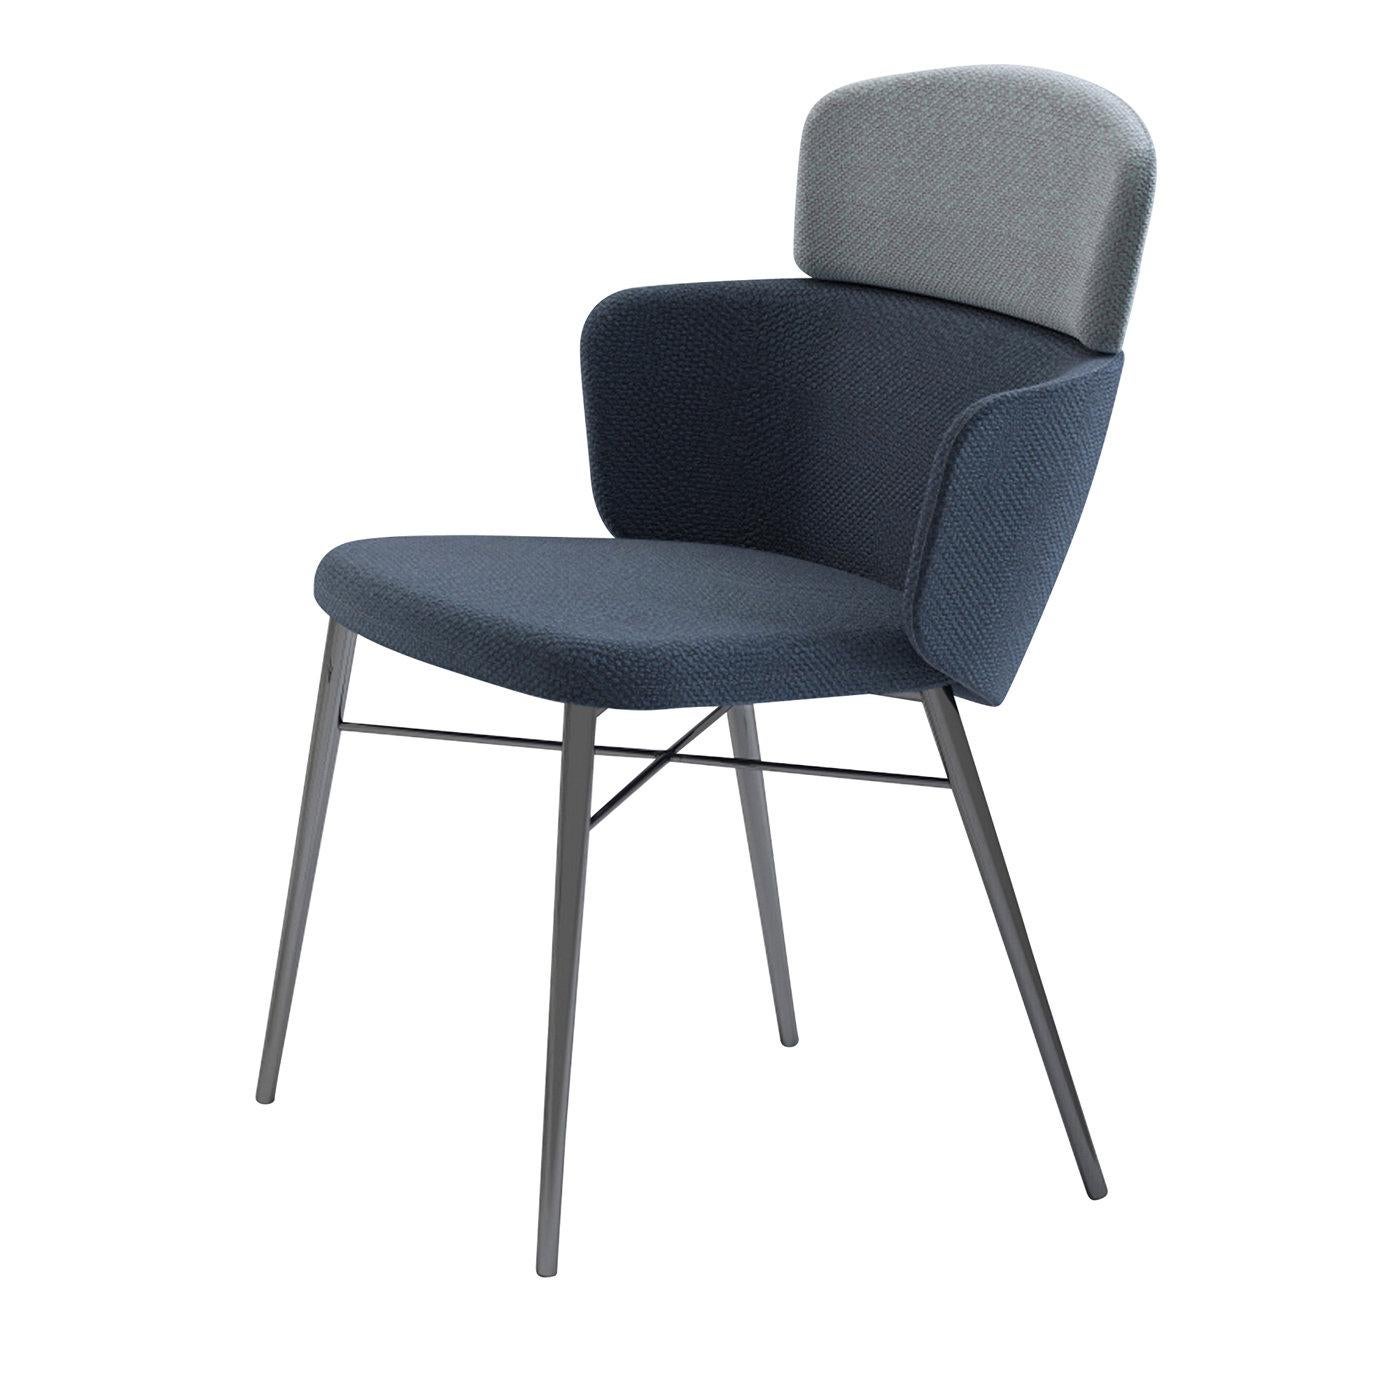 Kin Blue and Gray Chair with Amrests by Radice Orlandini For Sale